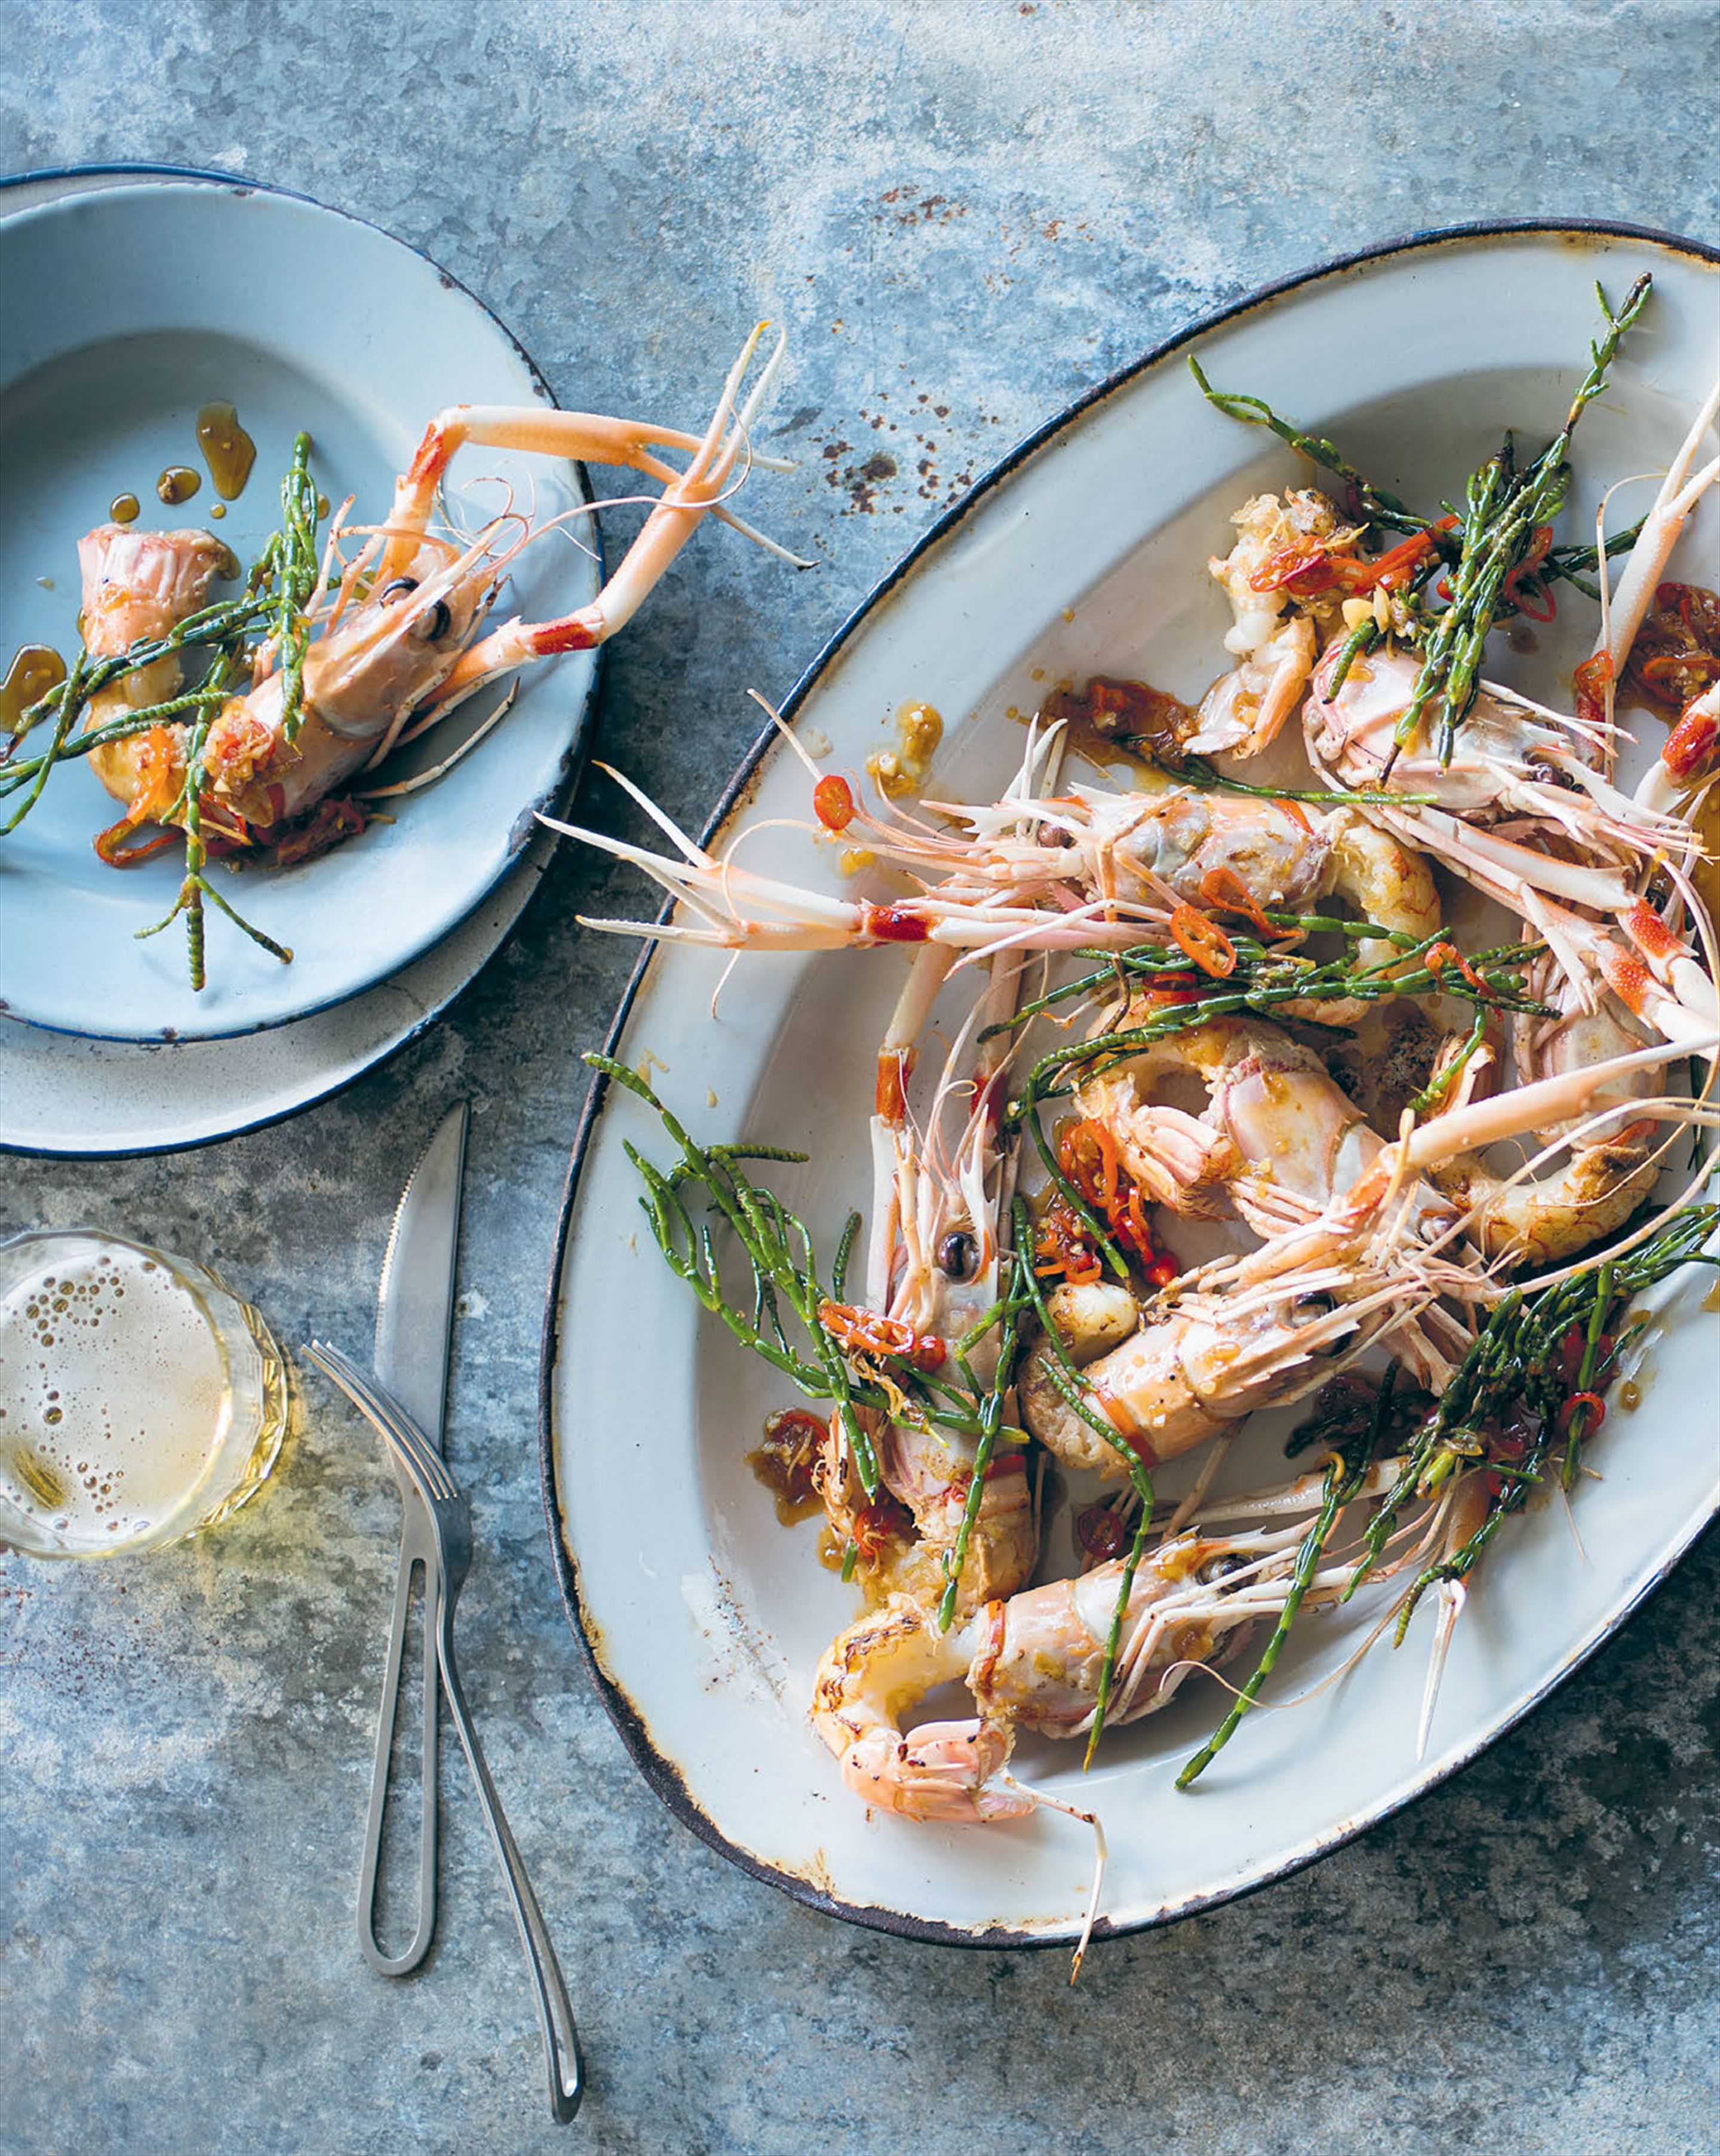 Wok-tossed langoustines with samphire & oyster sauce